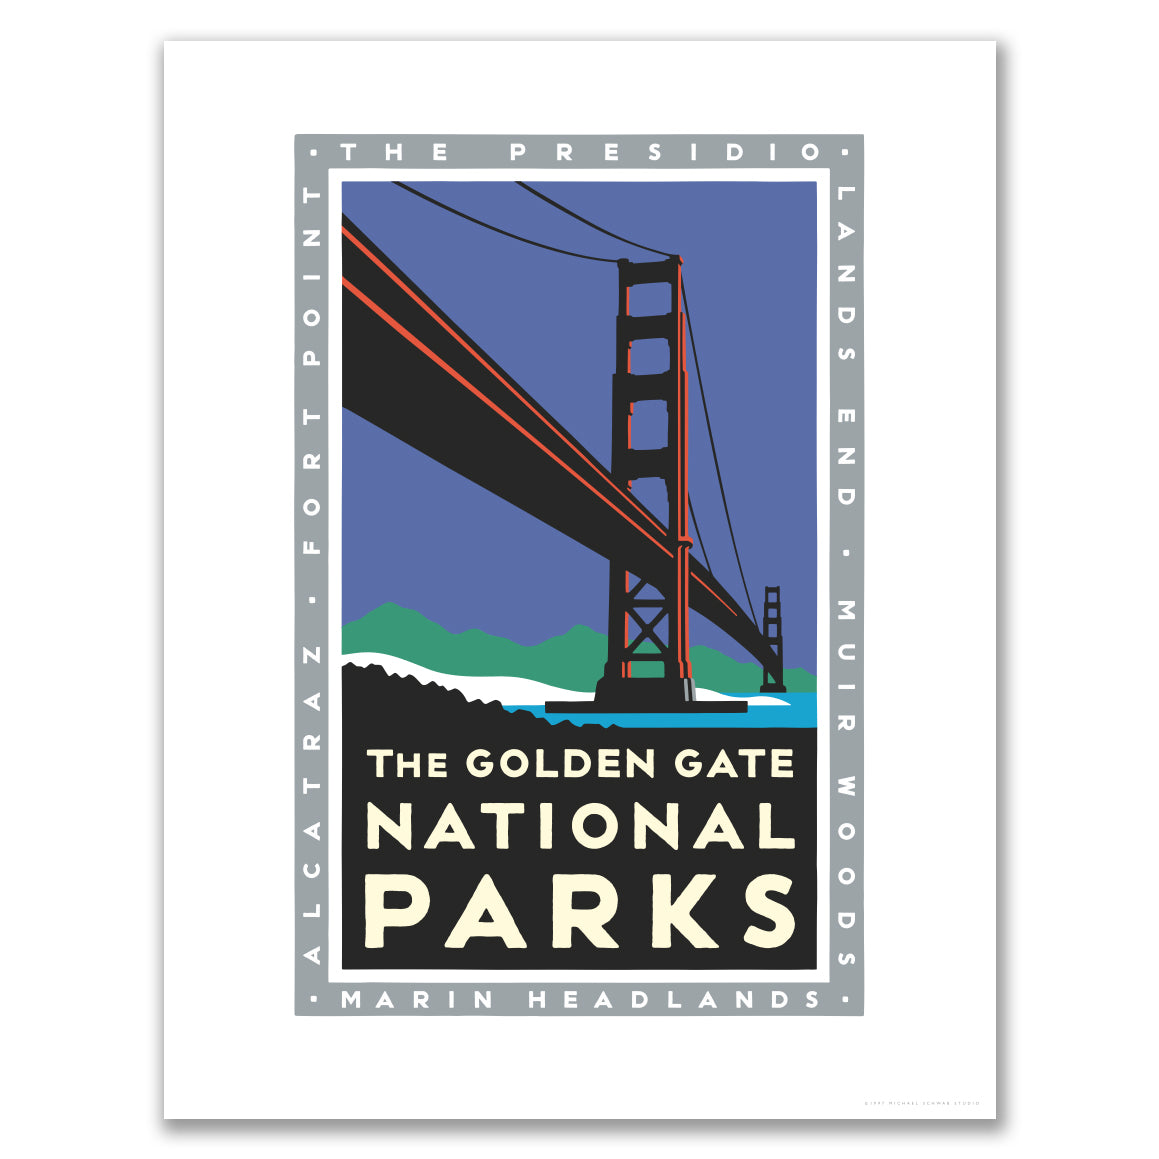 Multicolor Golden Gate National Parks Bridge giclee poster print, with art by Michael Schwab